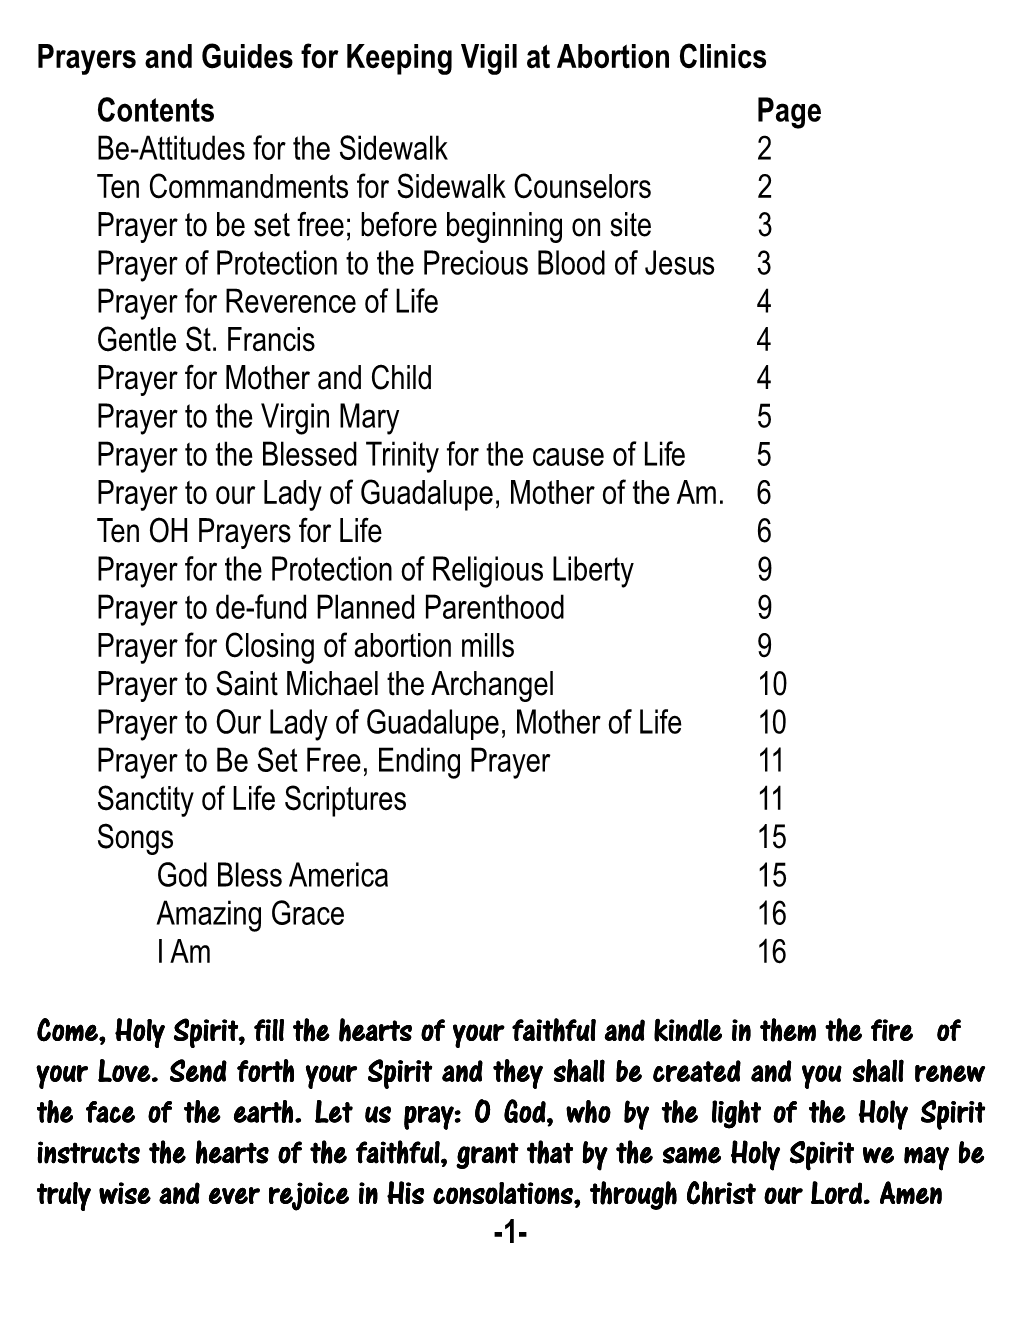 Prayers and Guides for Keeping Vigil at Abortion Clinics Contents Page